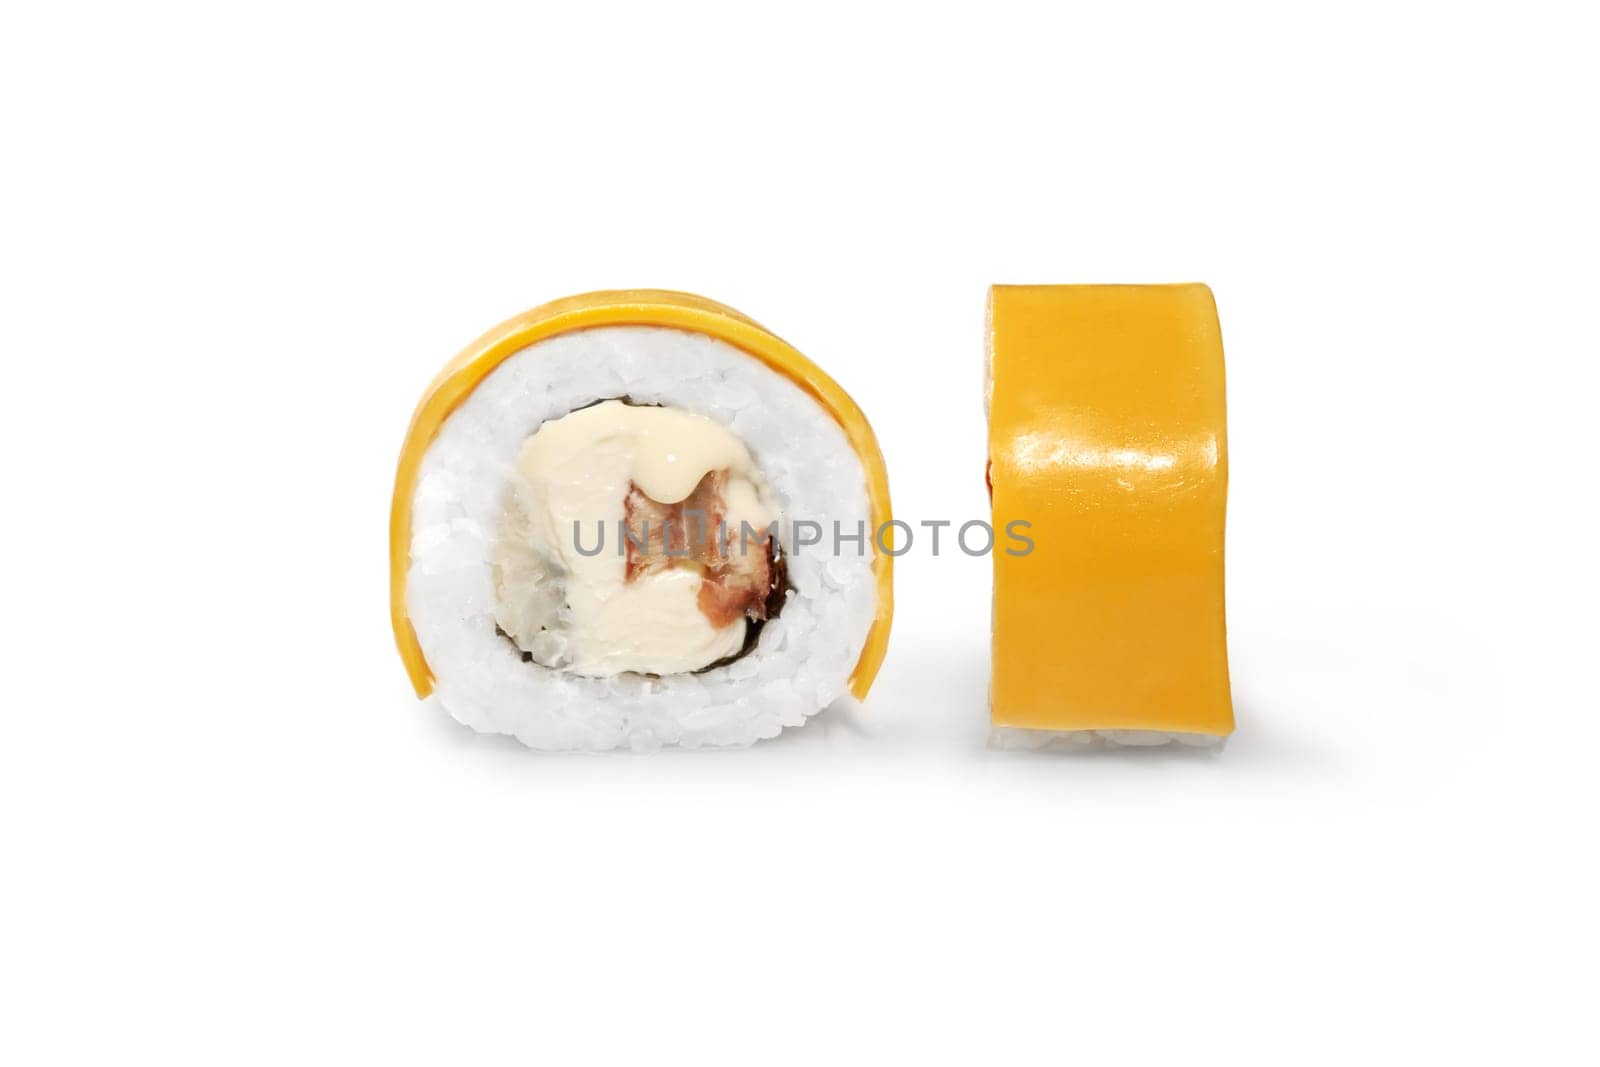 Delicious uramaki roll with cream cheese and eel wrapped in thin slice of yellow cheddar, detailed close up view isolated on white background. Traditional Japanese cuisine